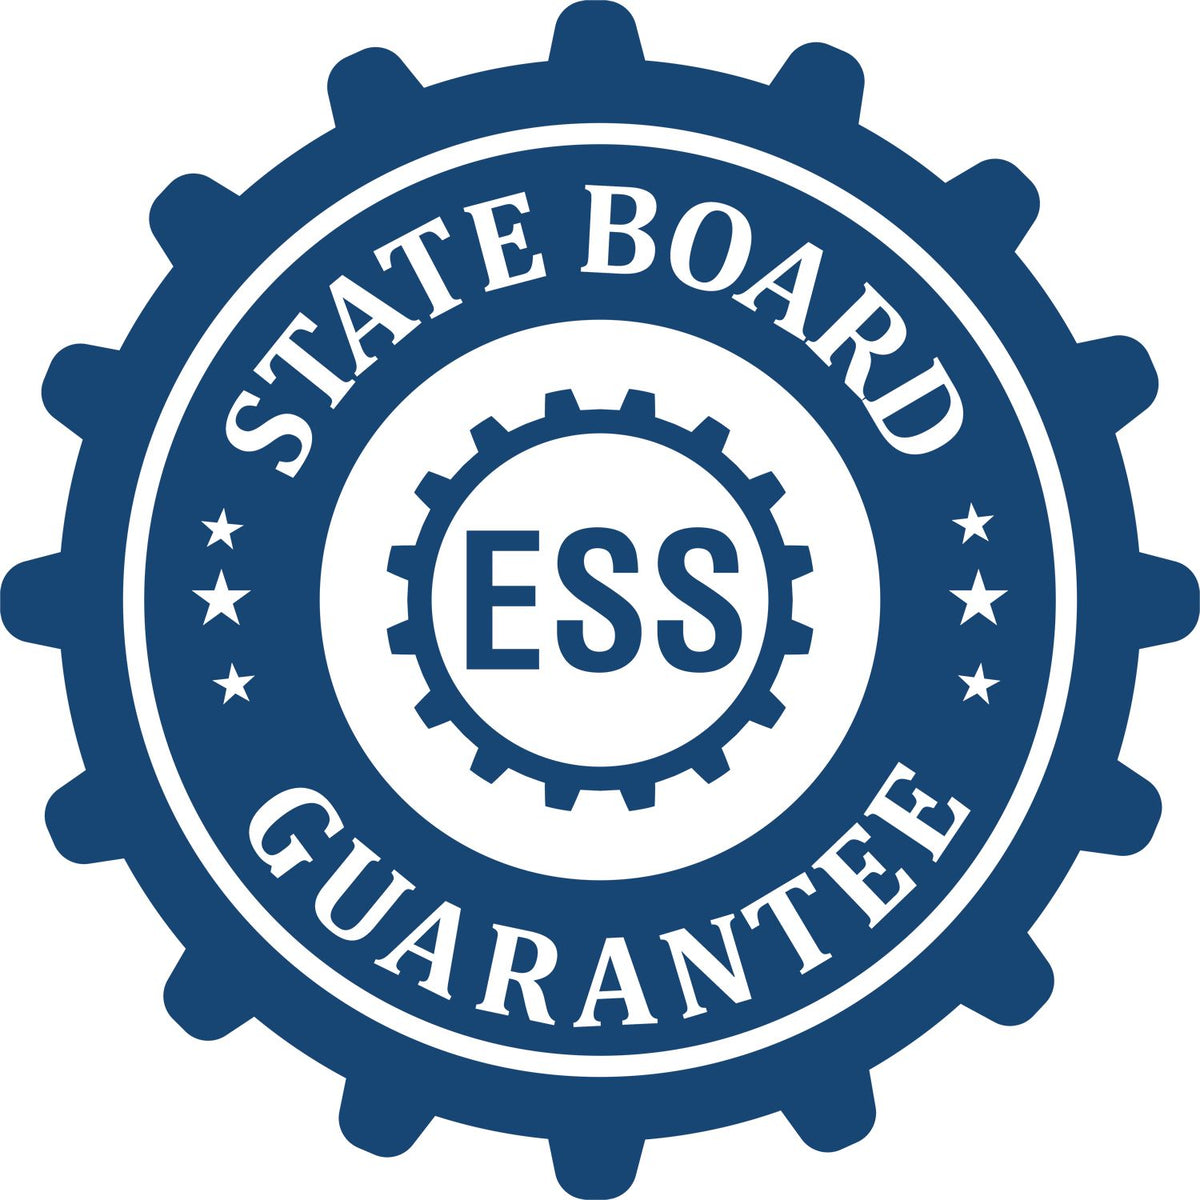 An emblem in a gear shape illustrating a state board guarantee for the Minnesota Engineer Desk Seal product.